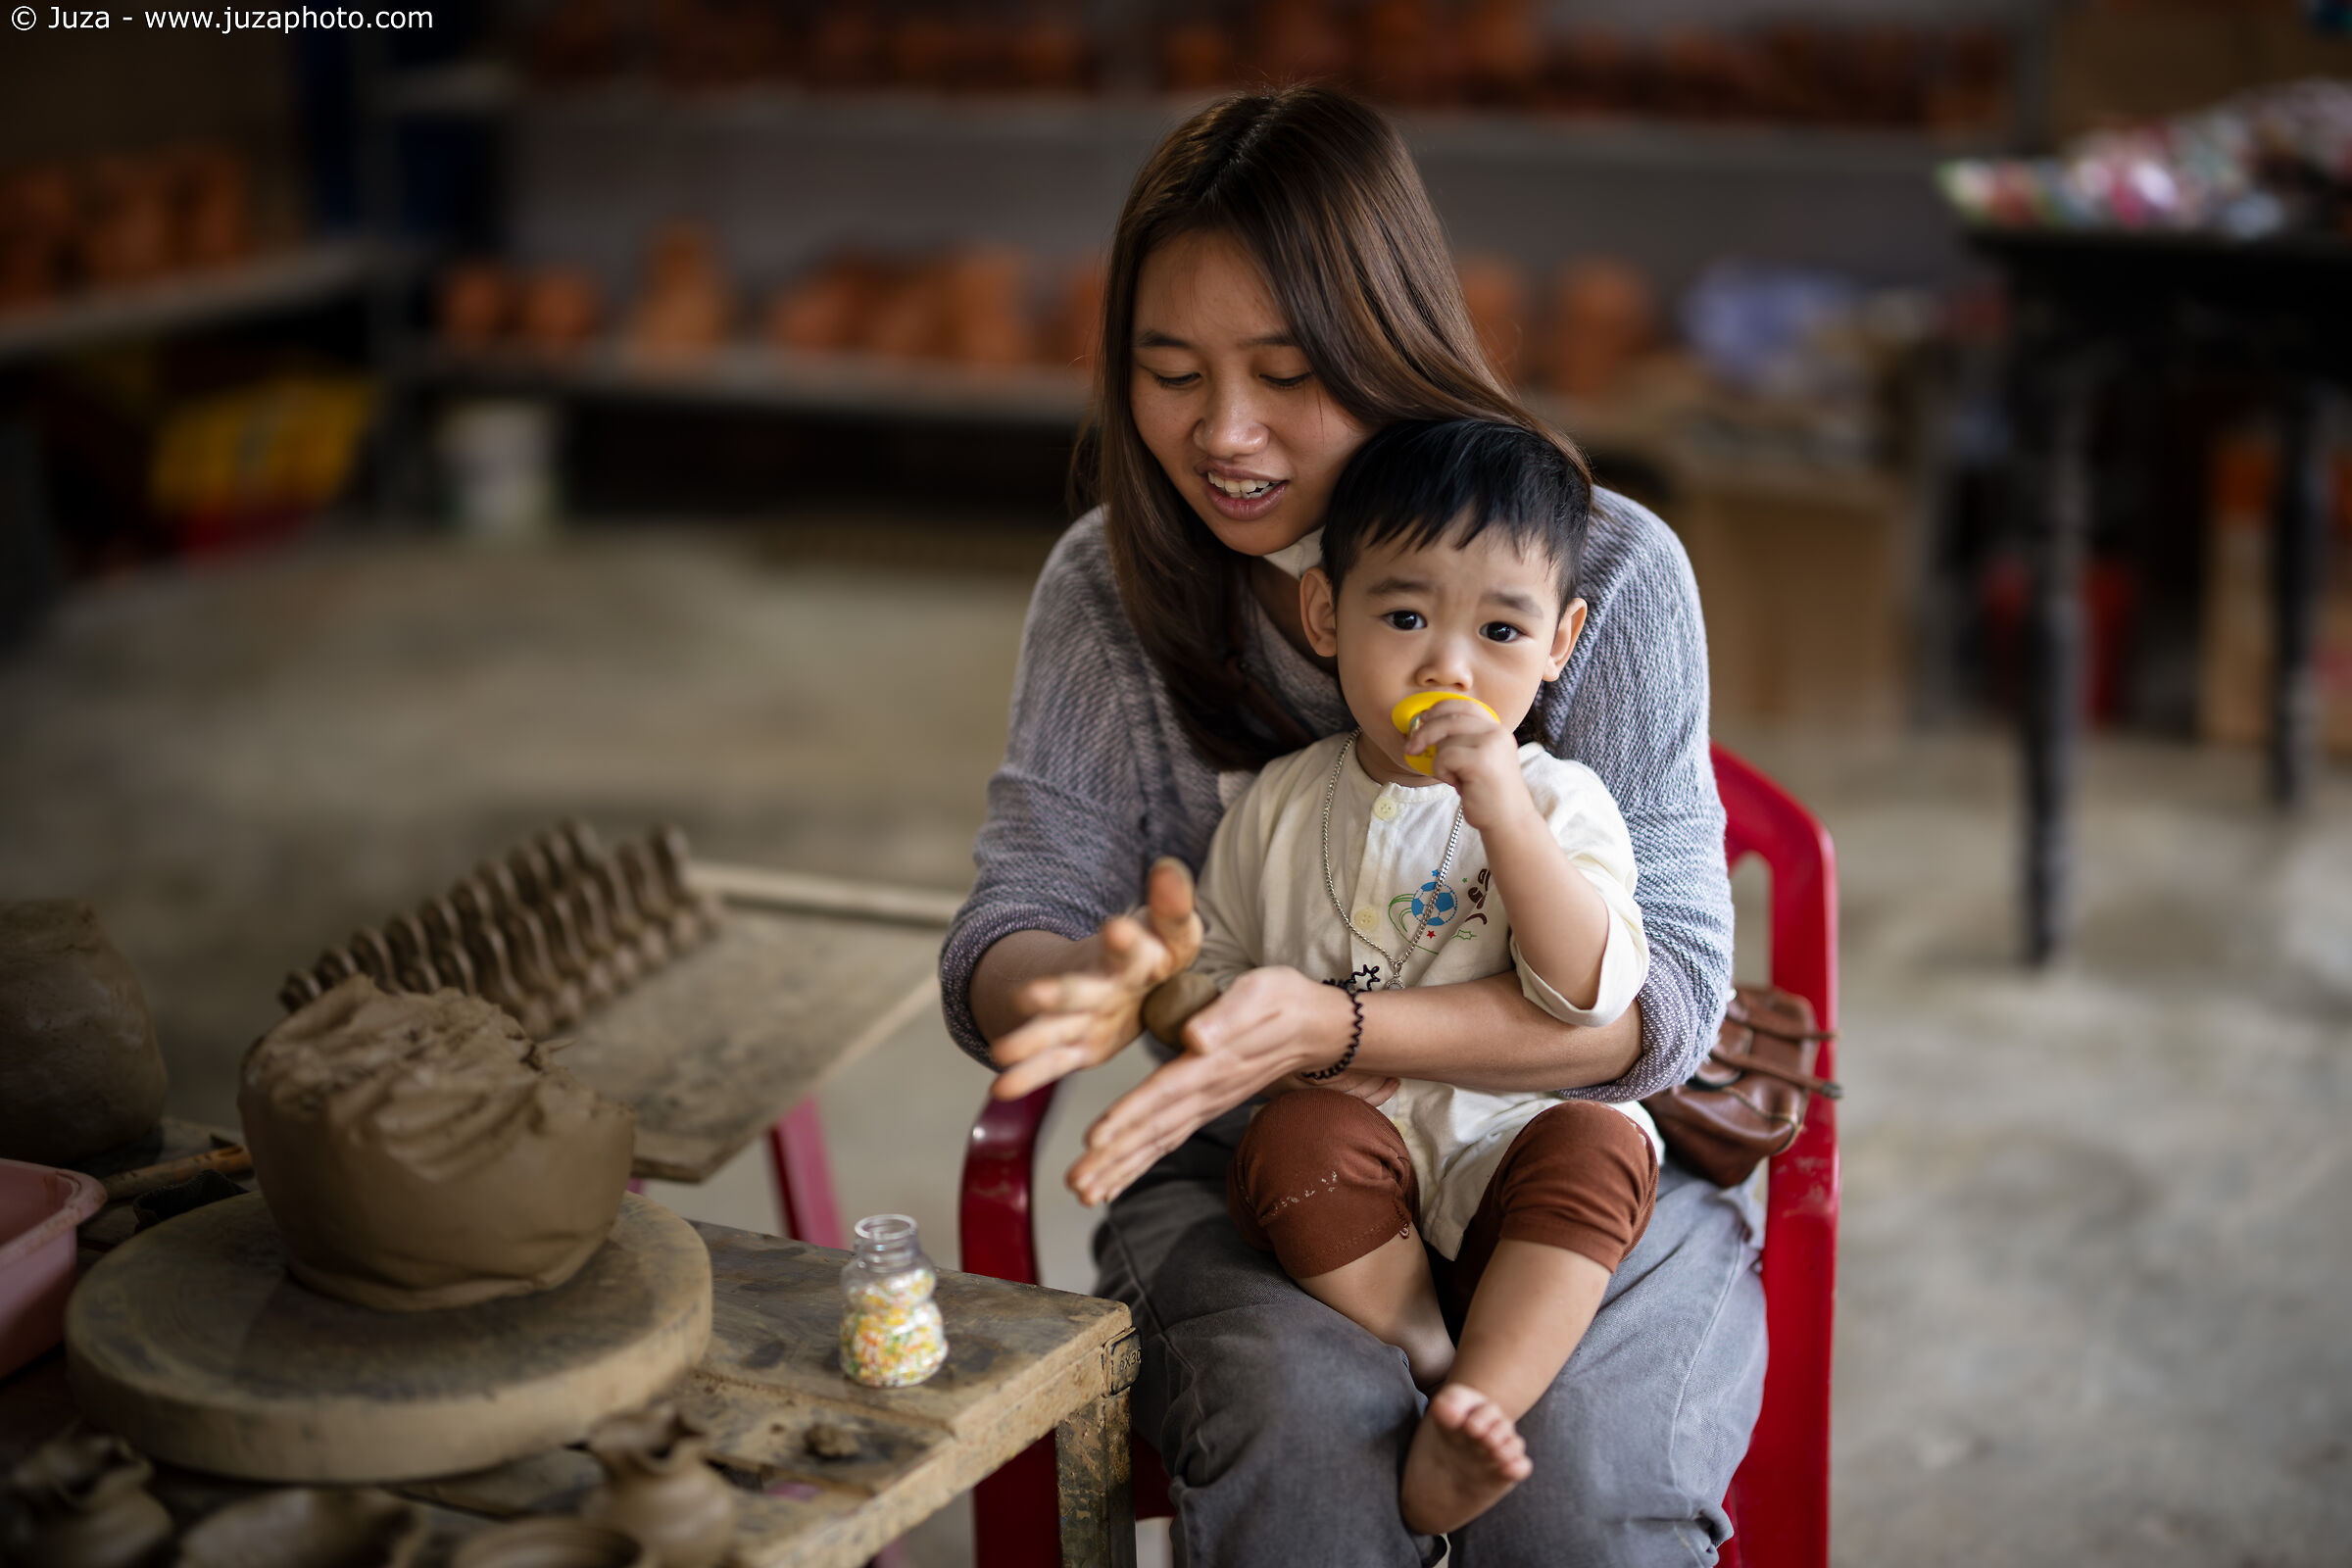 The Terracotta Artist and Her Child...